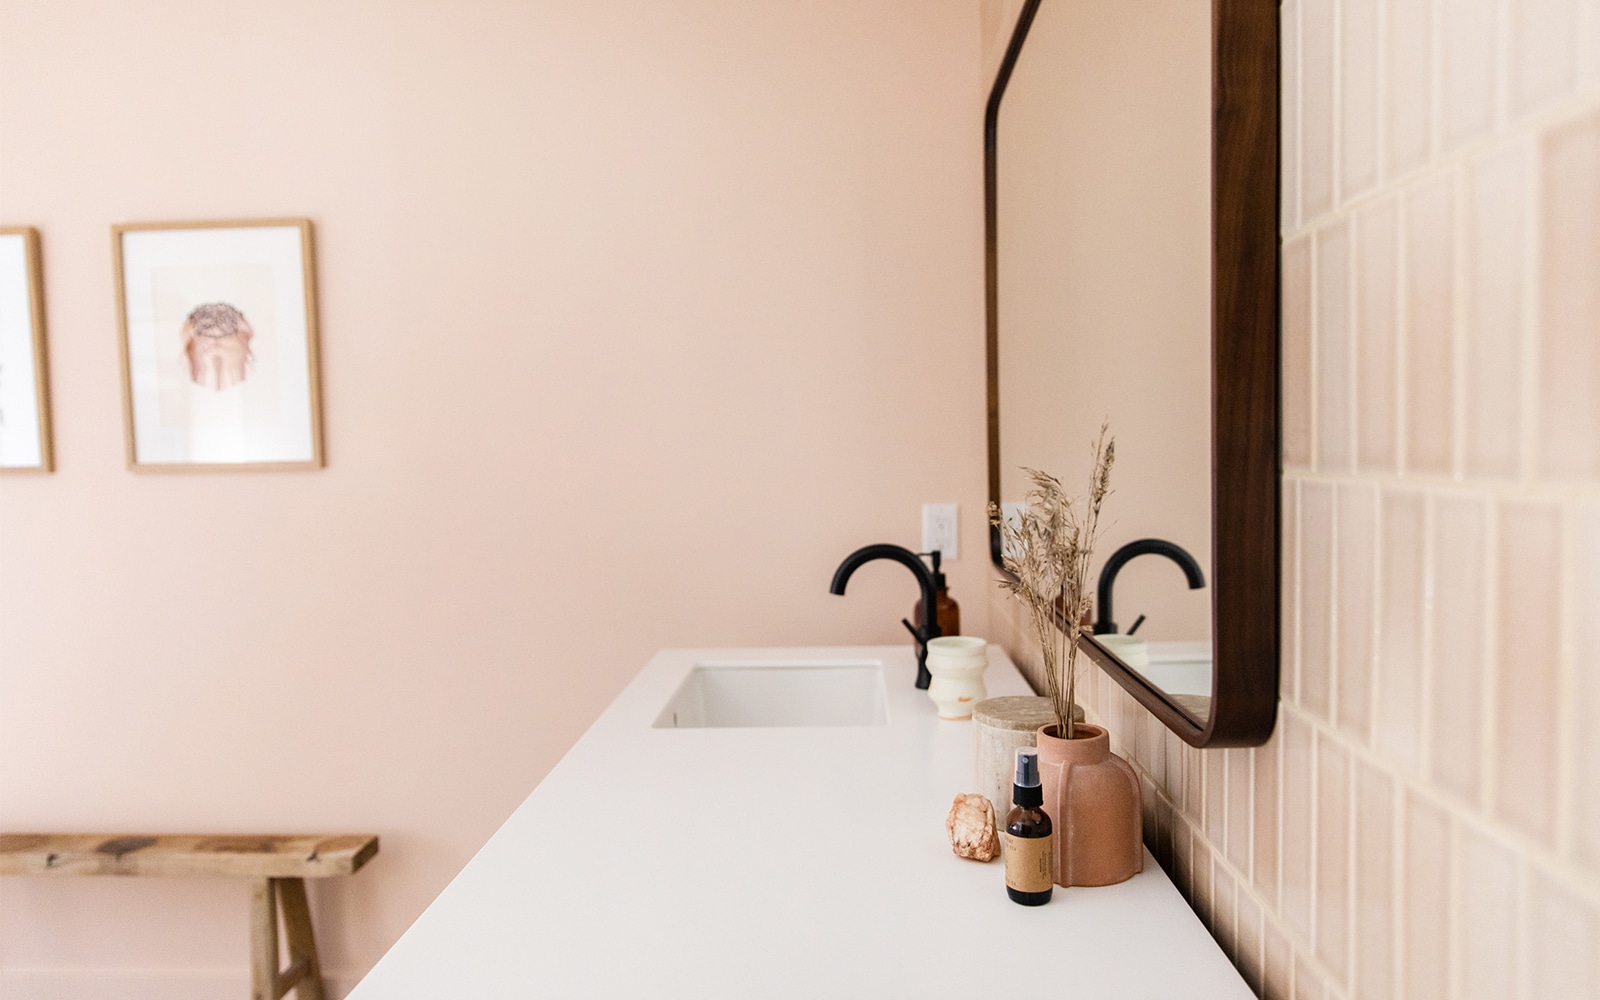 basement bathroom - Building Home. Our basement bathroom oasis is also full of utility for our guests and life. See how we created it all with Fireclay Tile.